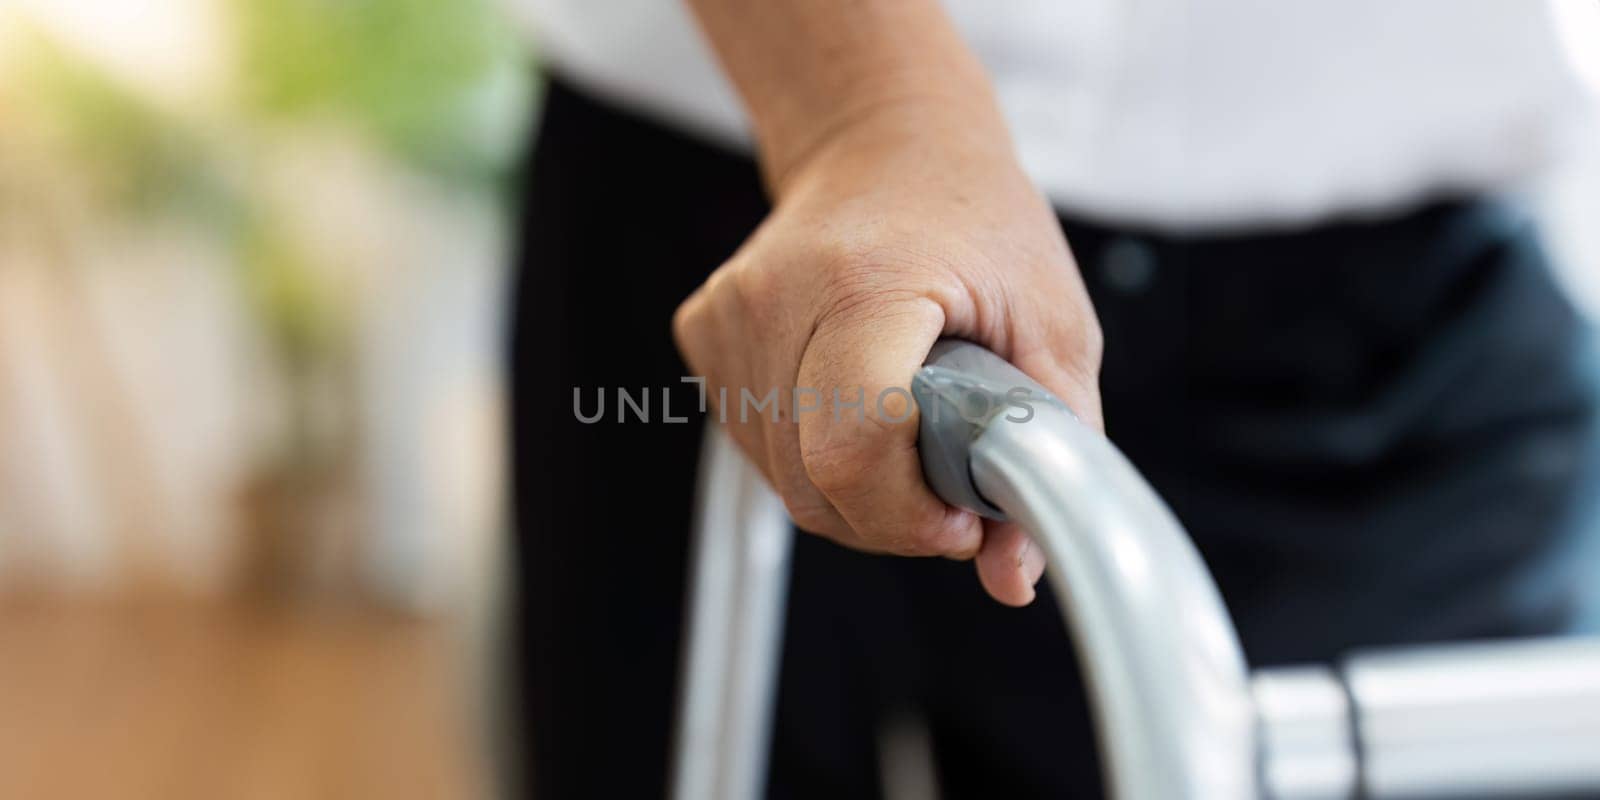 A person is holding a walker with a hand on the handle. The person is wearing a white shirt and black pants